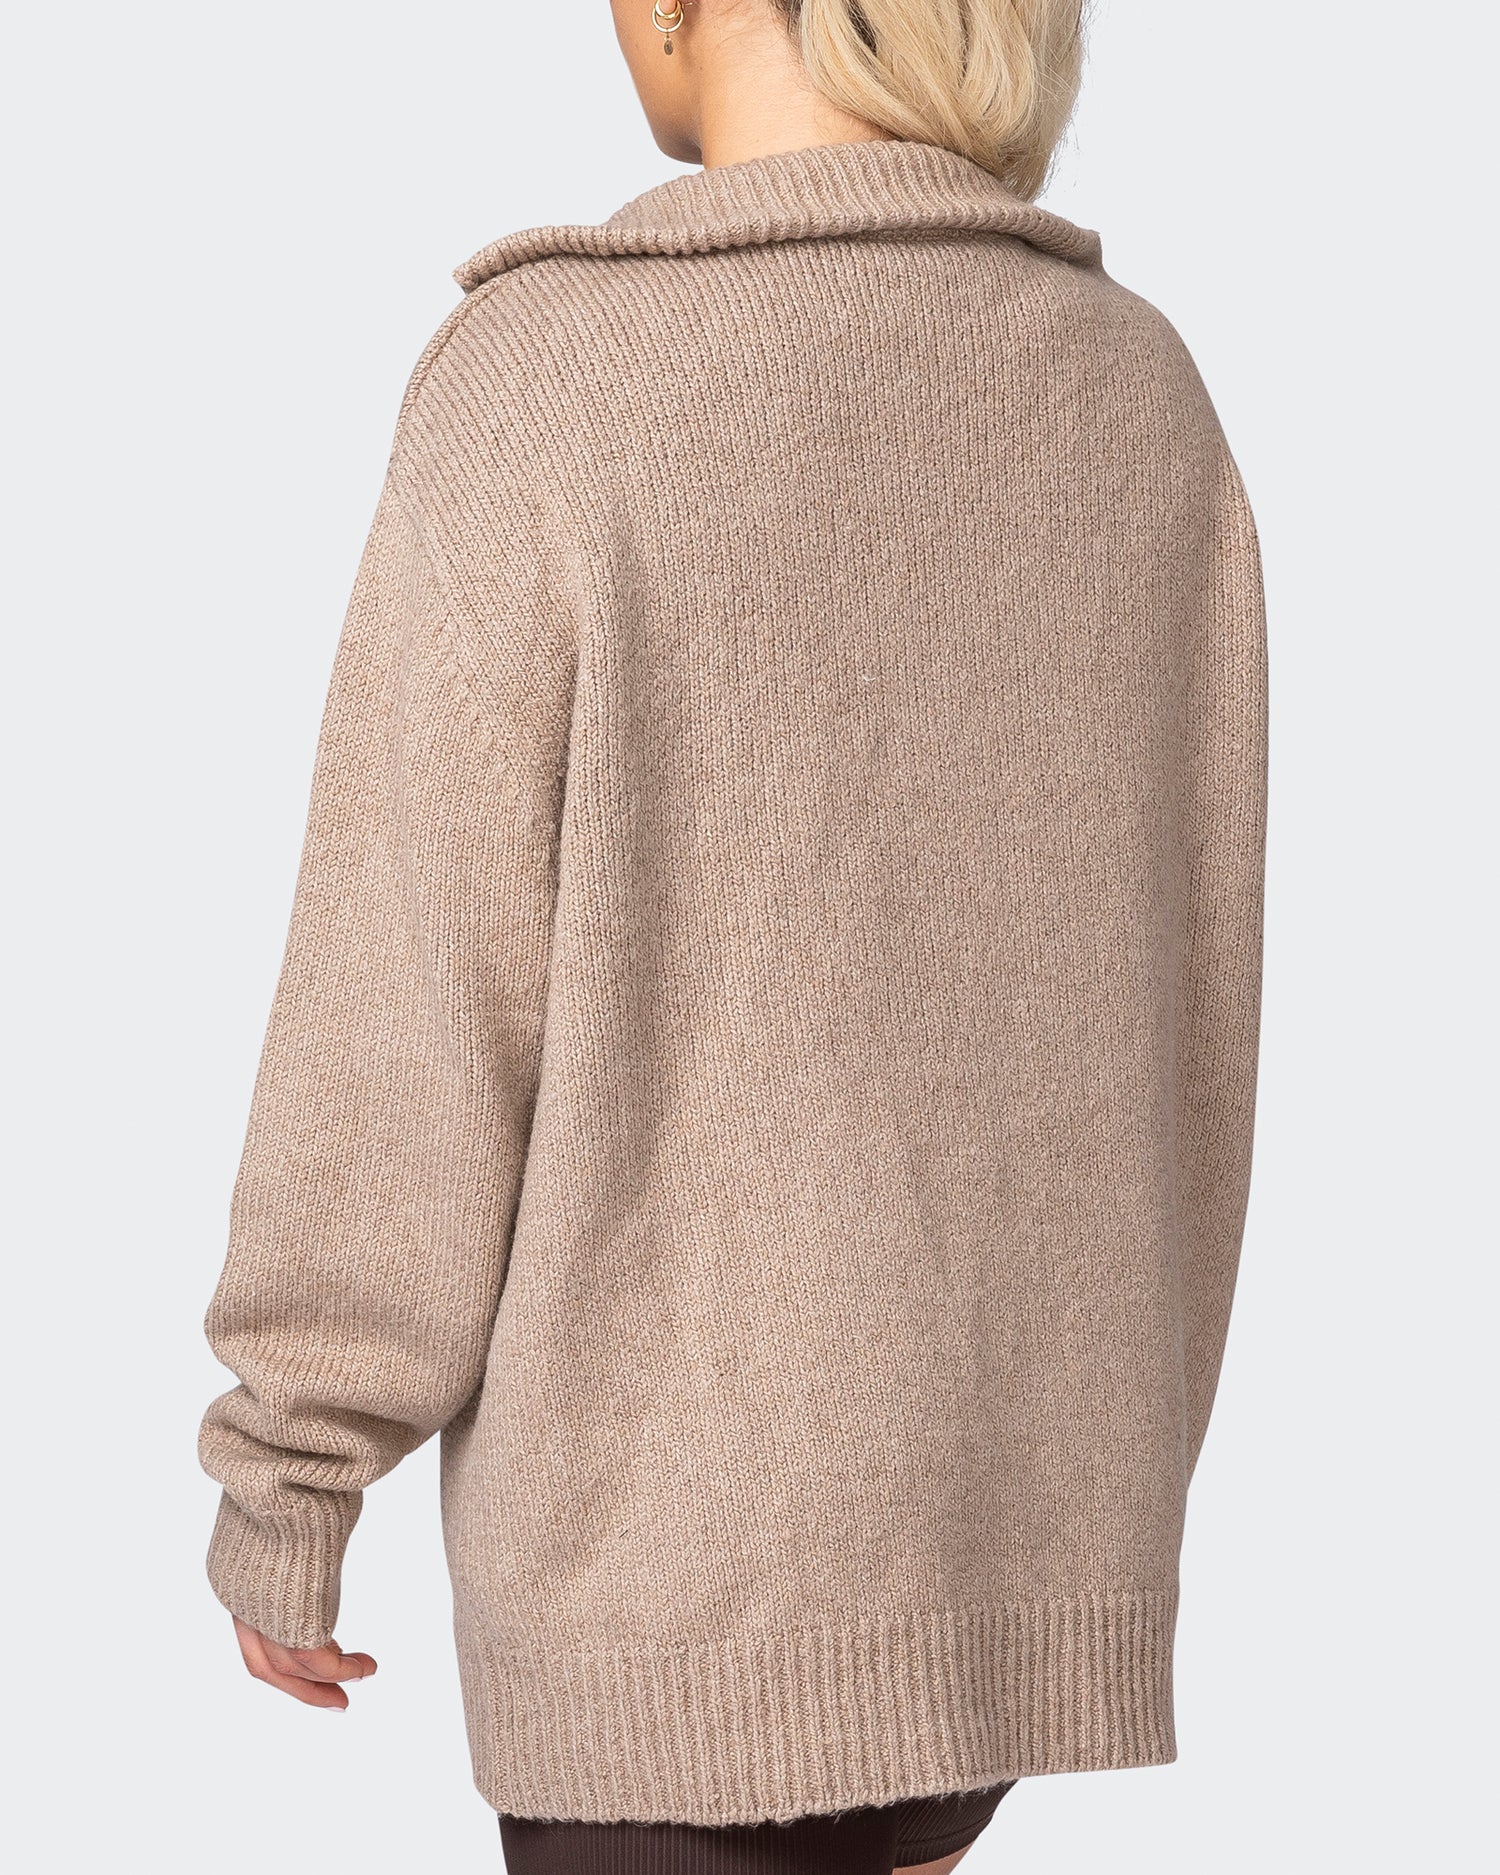 Heritage Oversized Knit - Fossil